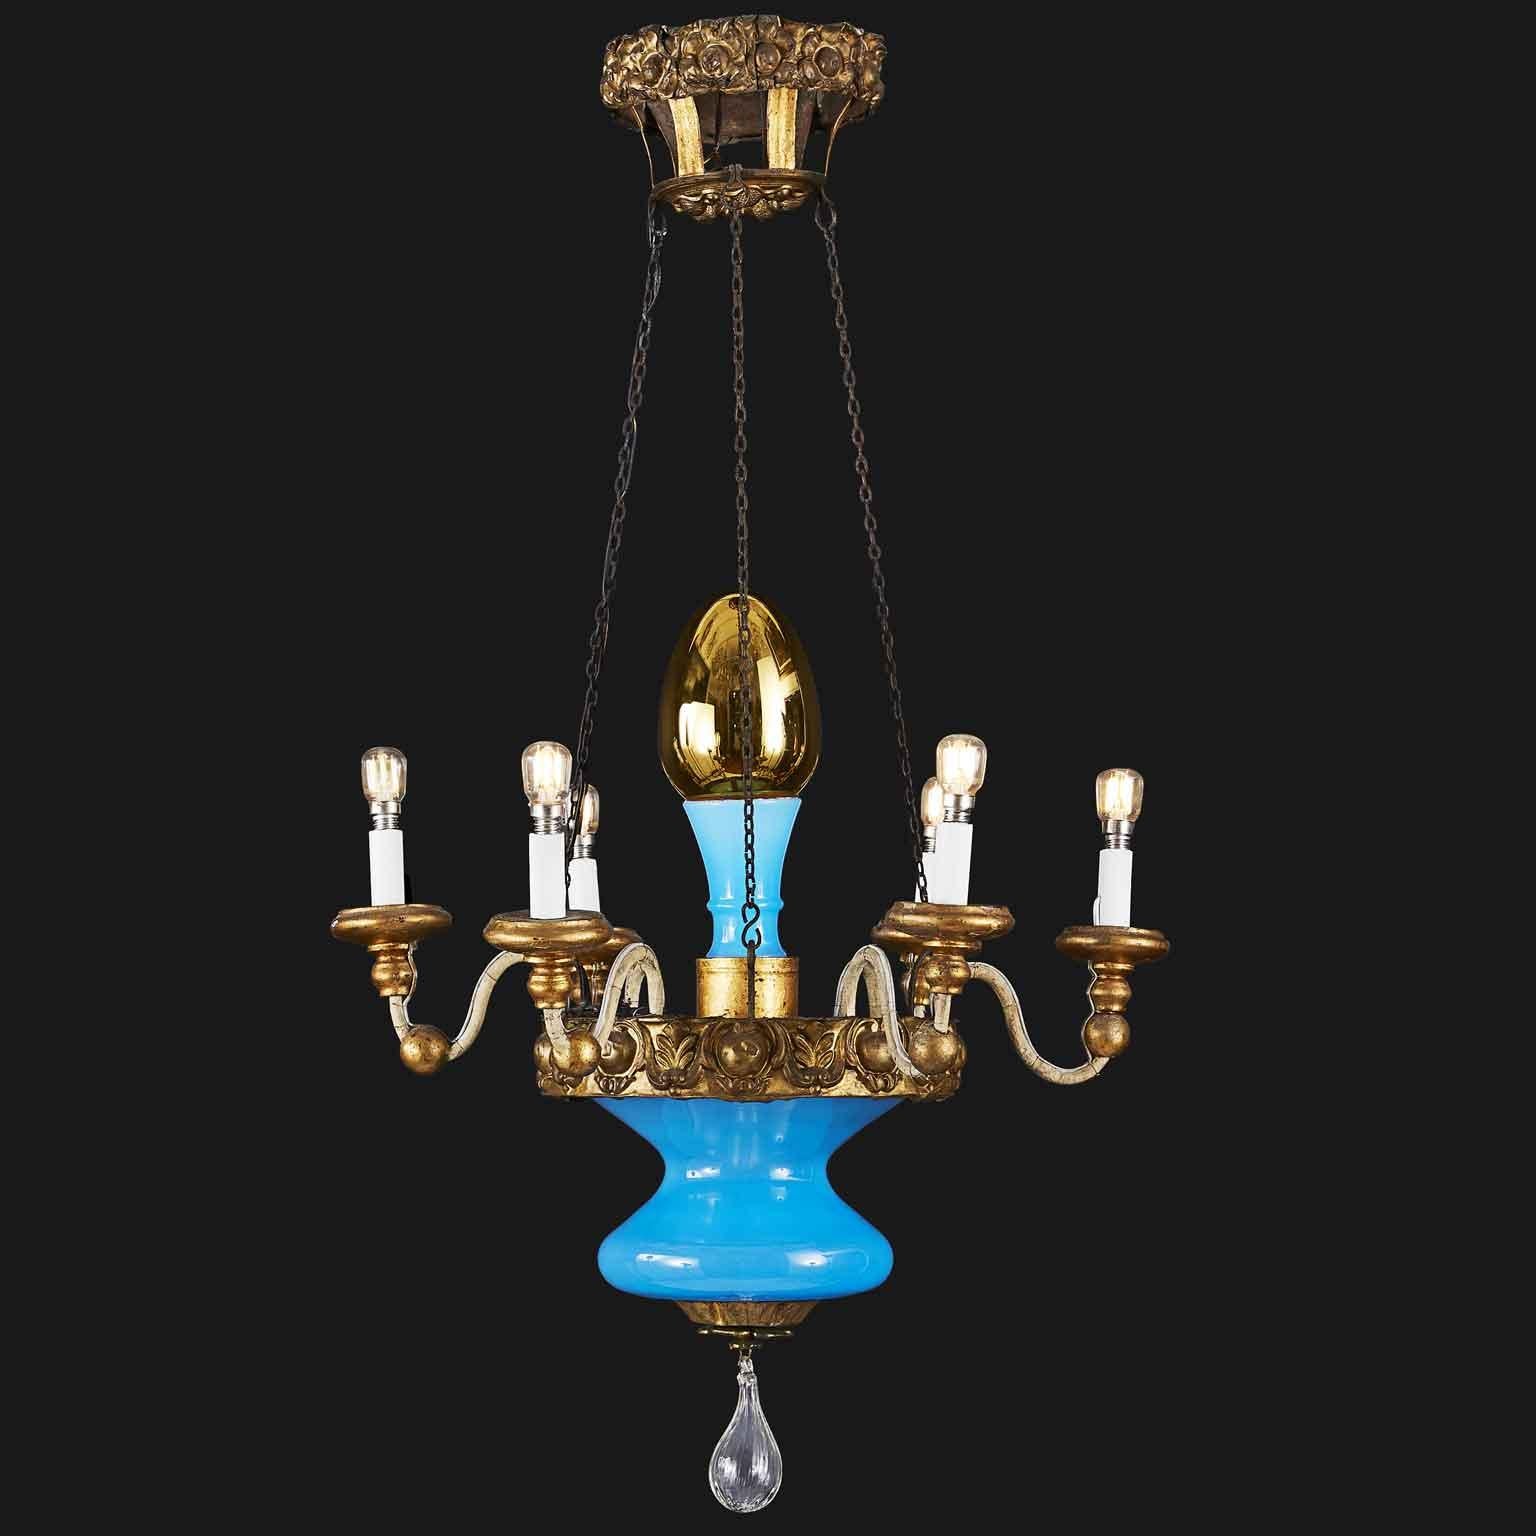 A charming Italian six armed chandelier from Tuscany, Lucca dating back to the late 19th century. In good condition, hand-realized with a very unusual structure, very original and unique. Features a gilded repoussé brass and iron crowns and a lovely